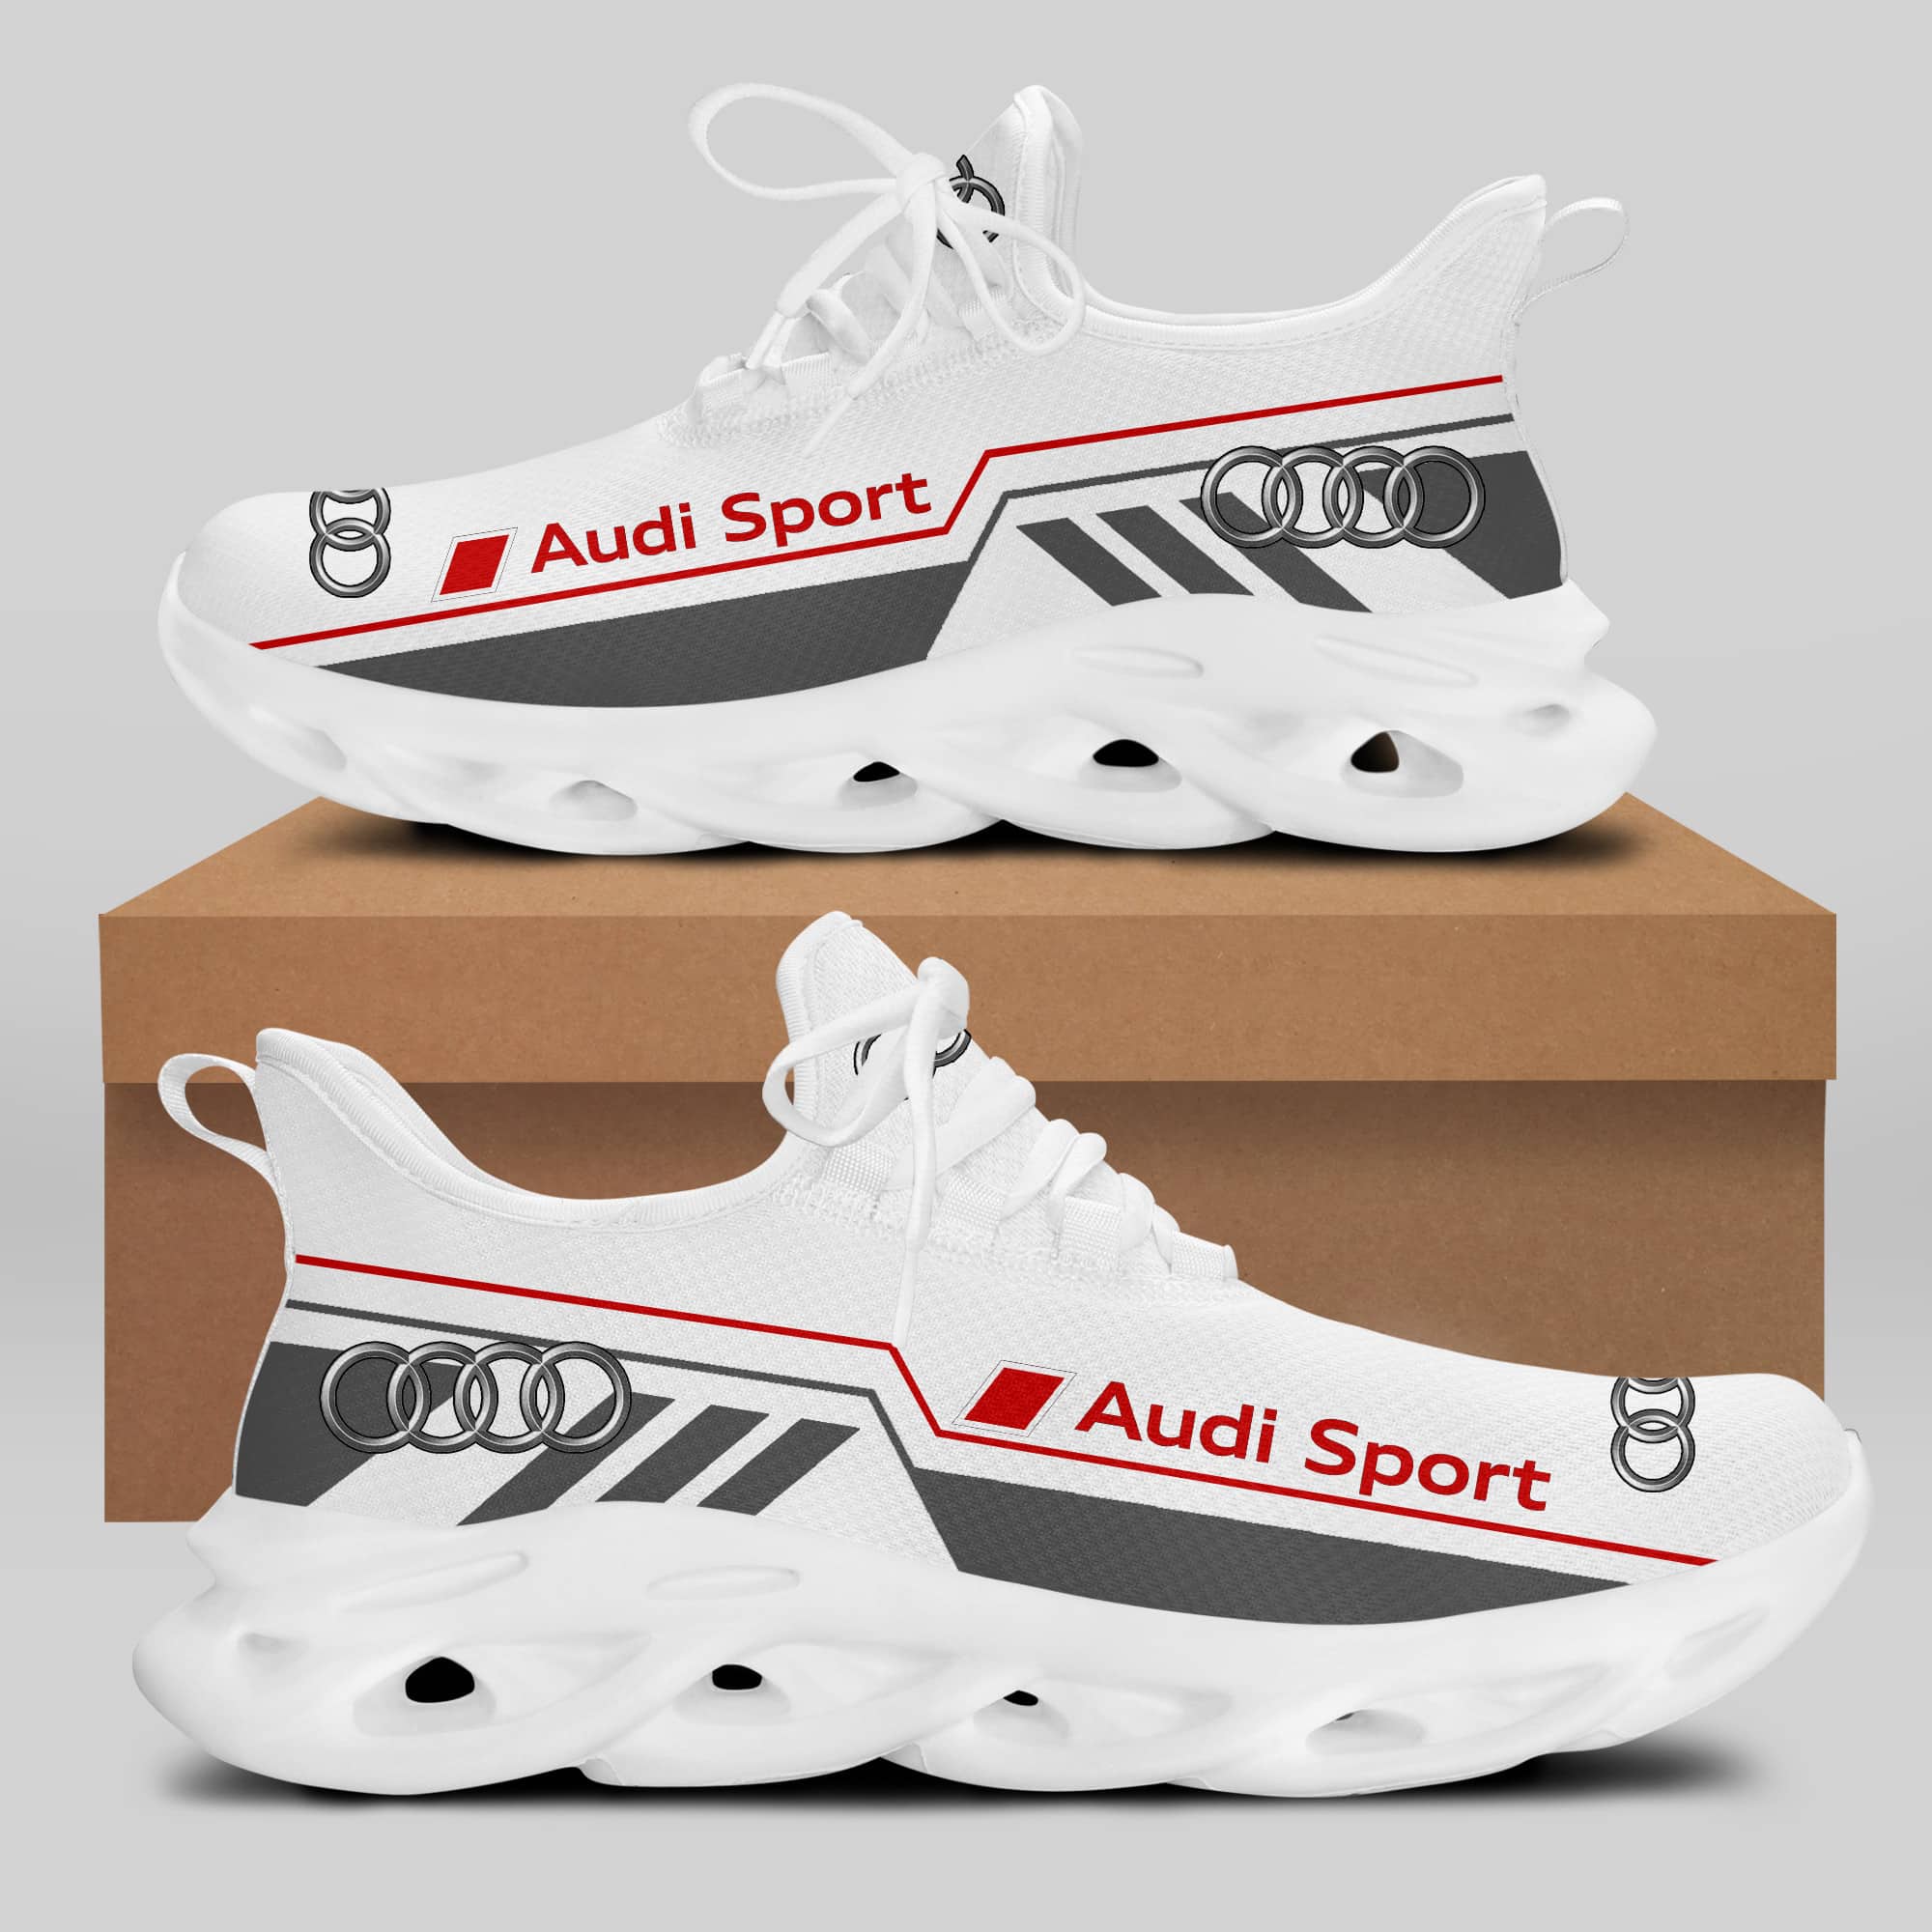 Audi Sport Running Shoes Max Soul Shoes Sneakers Ver 20 1